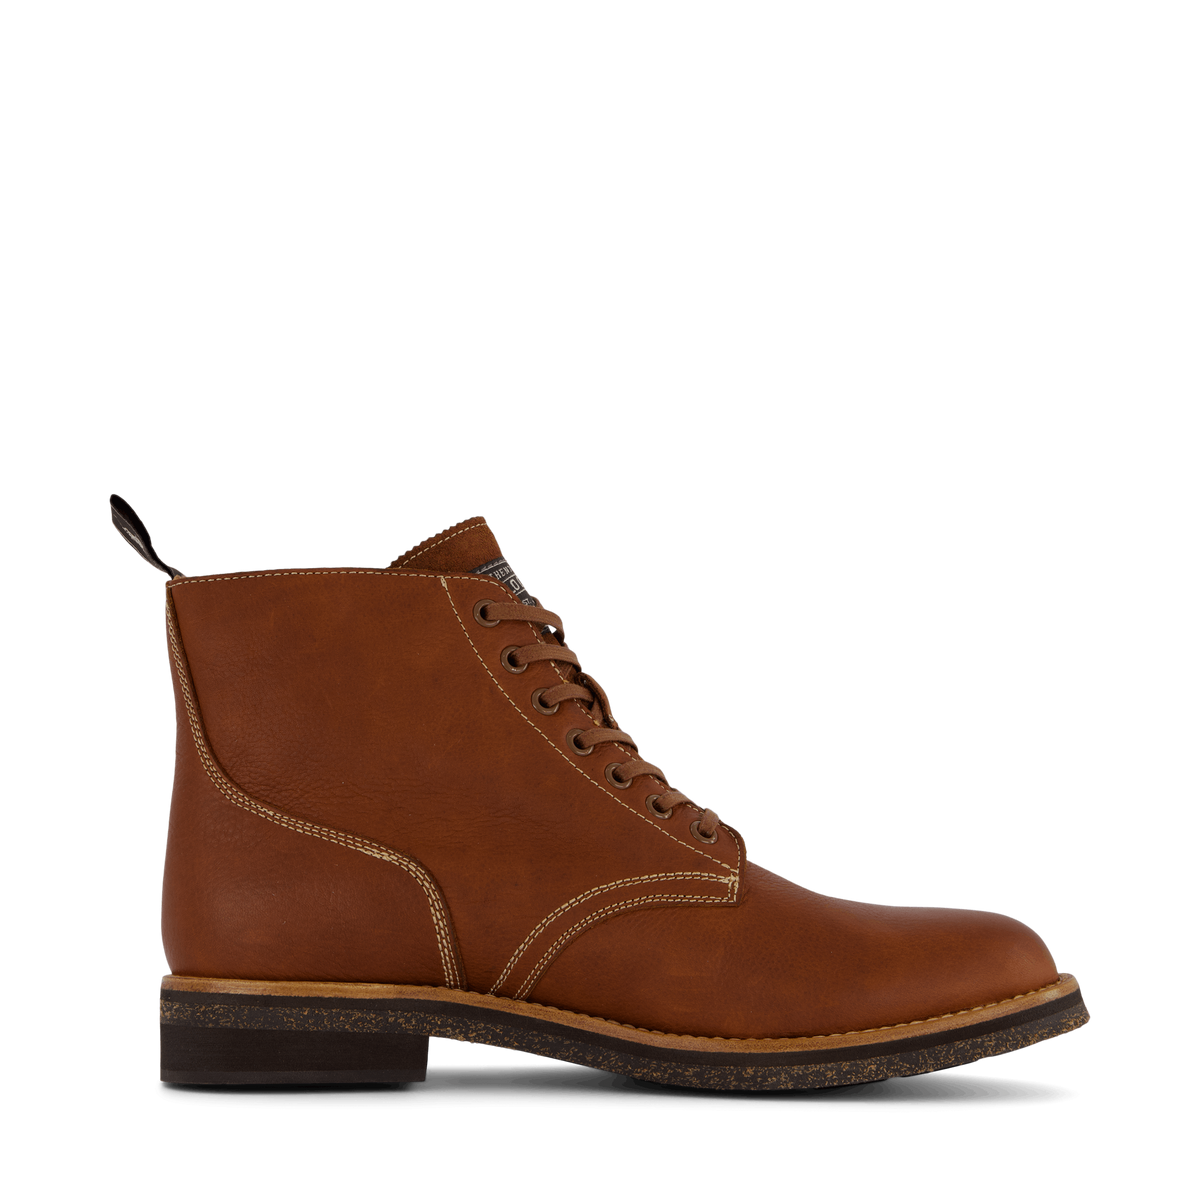 Polo Ralph Lauren Tumbled Leather Boot